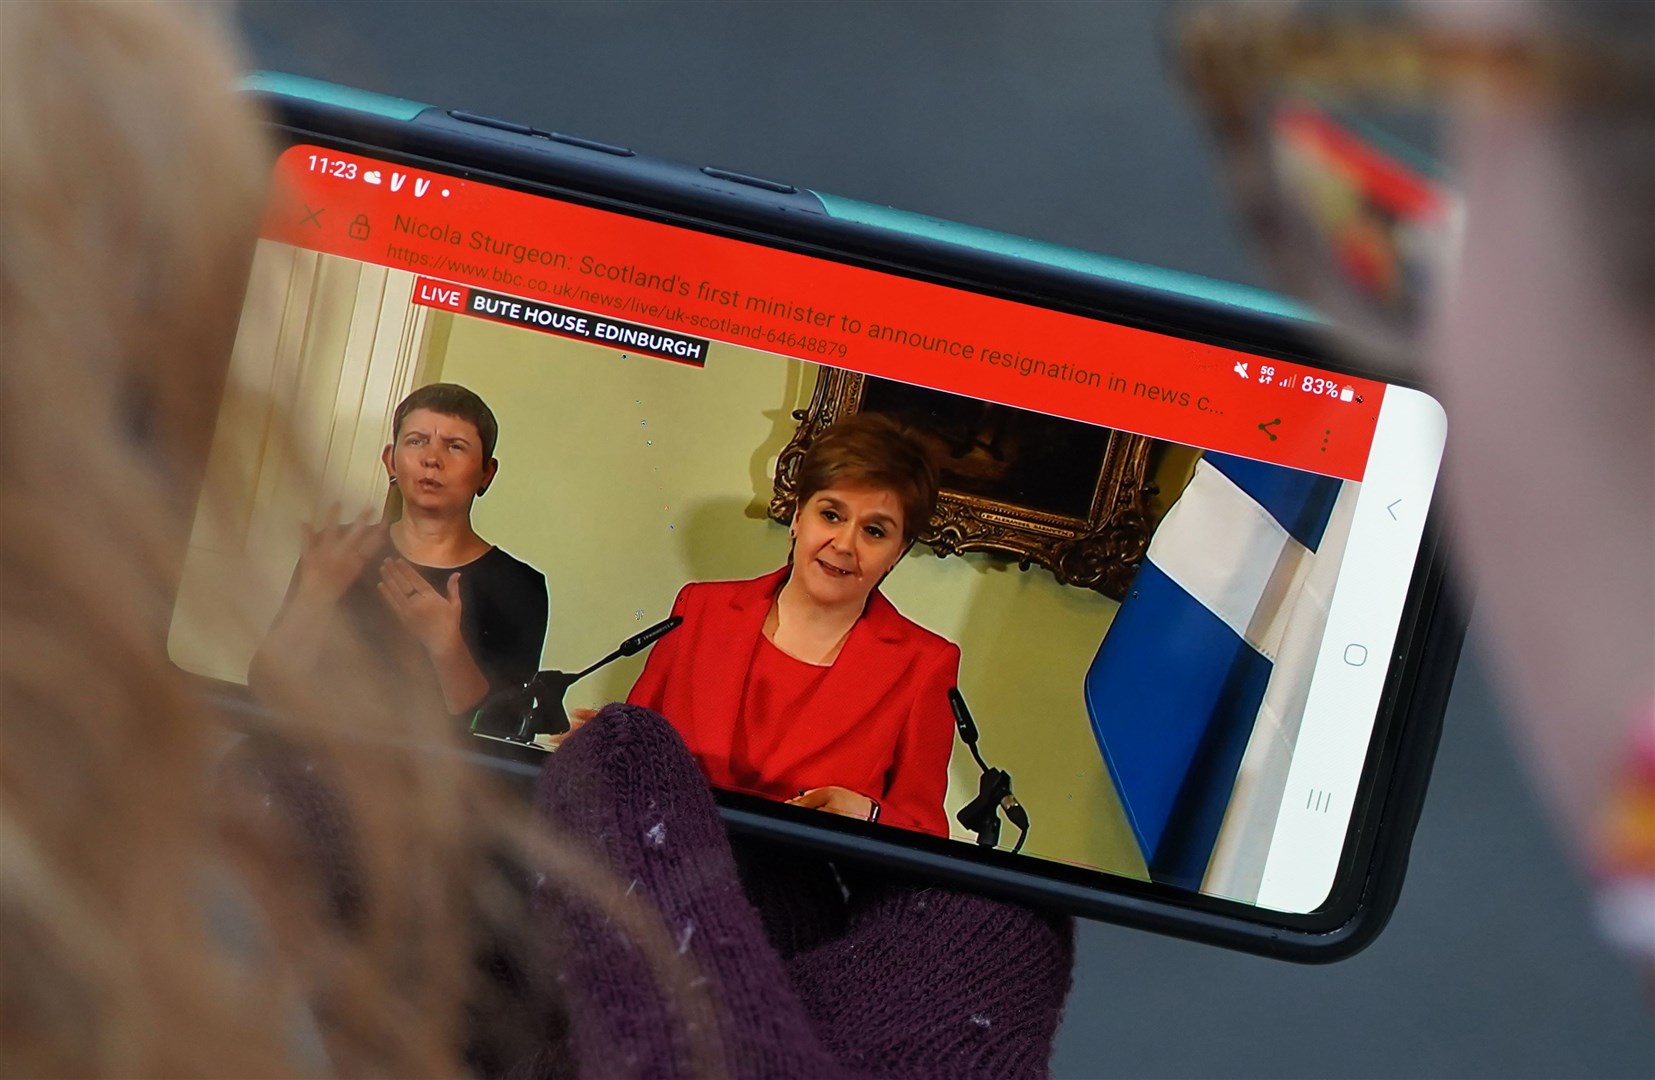 Members of the public outside Bute House in Edinburgh watching the press conference where First Minister Nicola Sturgeon announced she will stand down as First Minister for Scotland (Andrew Milligan/PA)